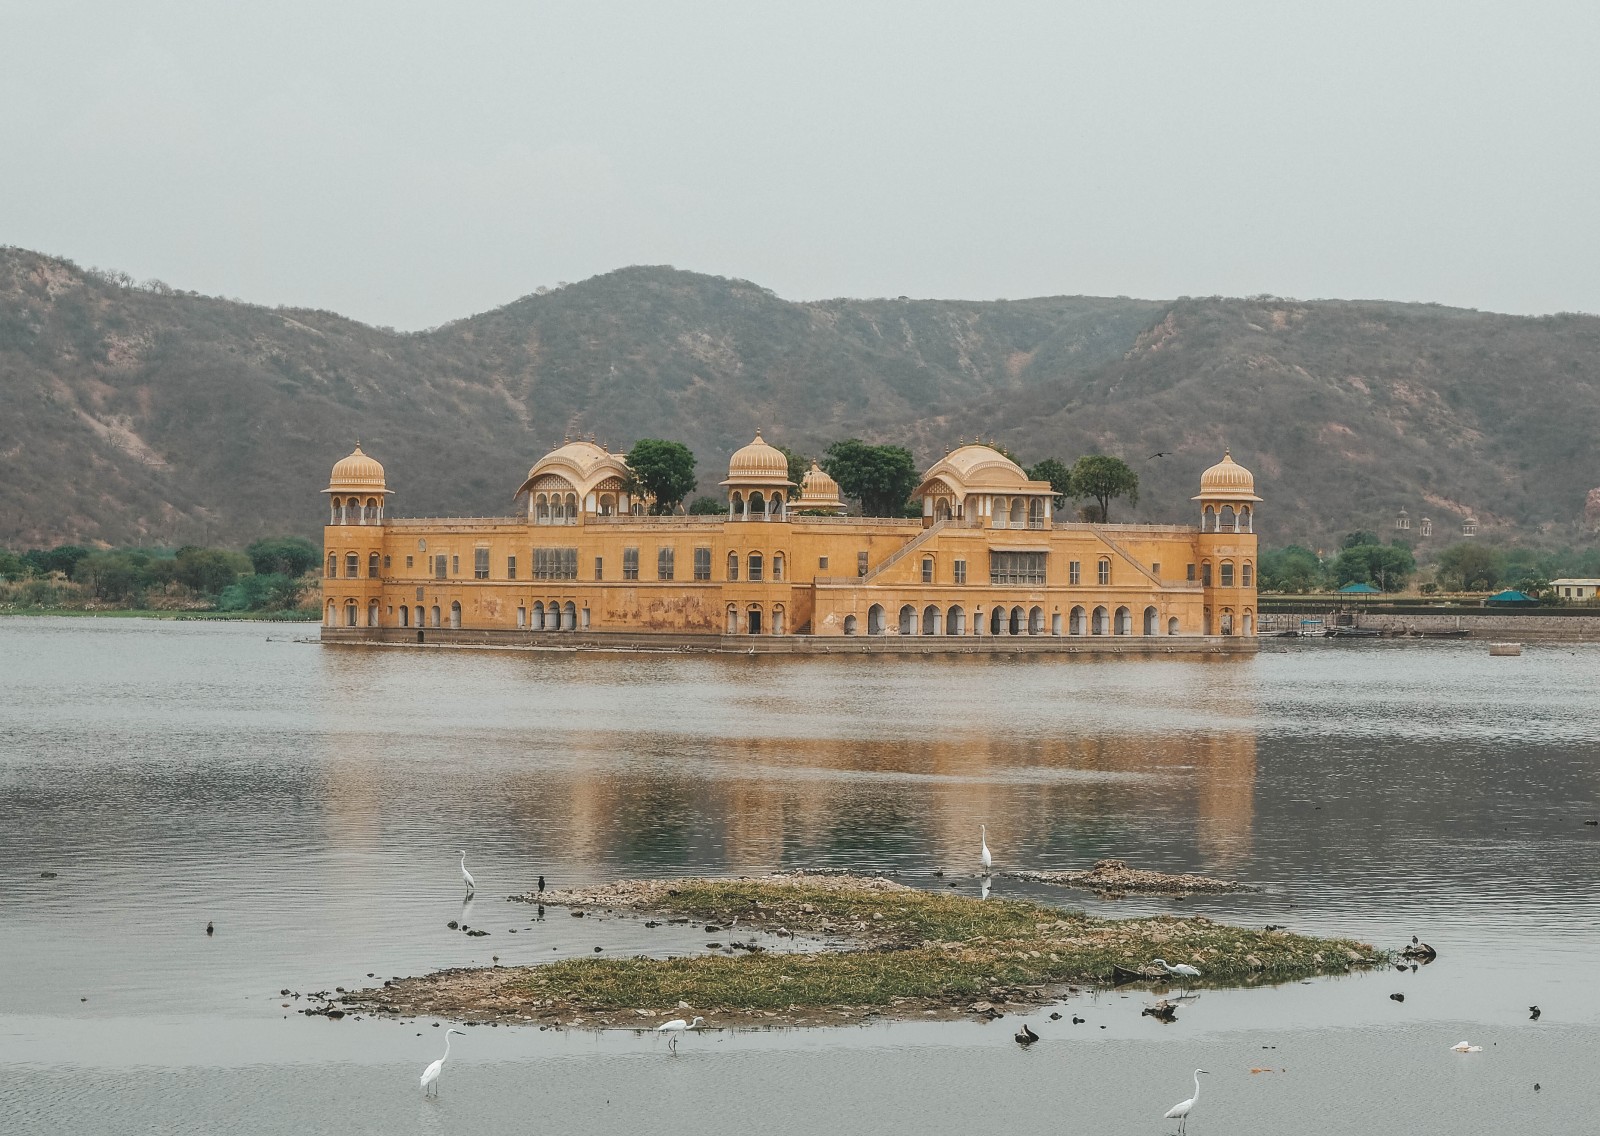 A floating temple Jal Mahal